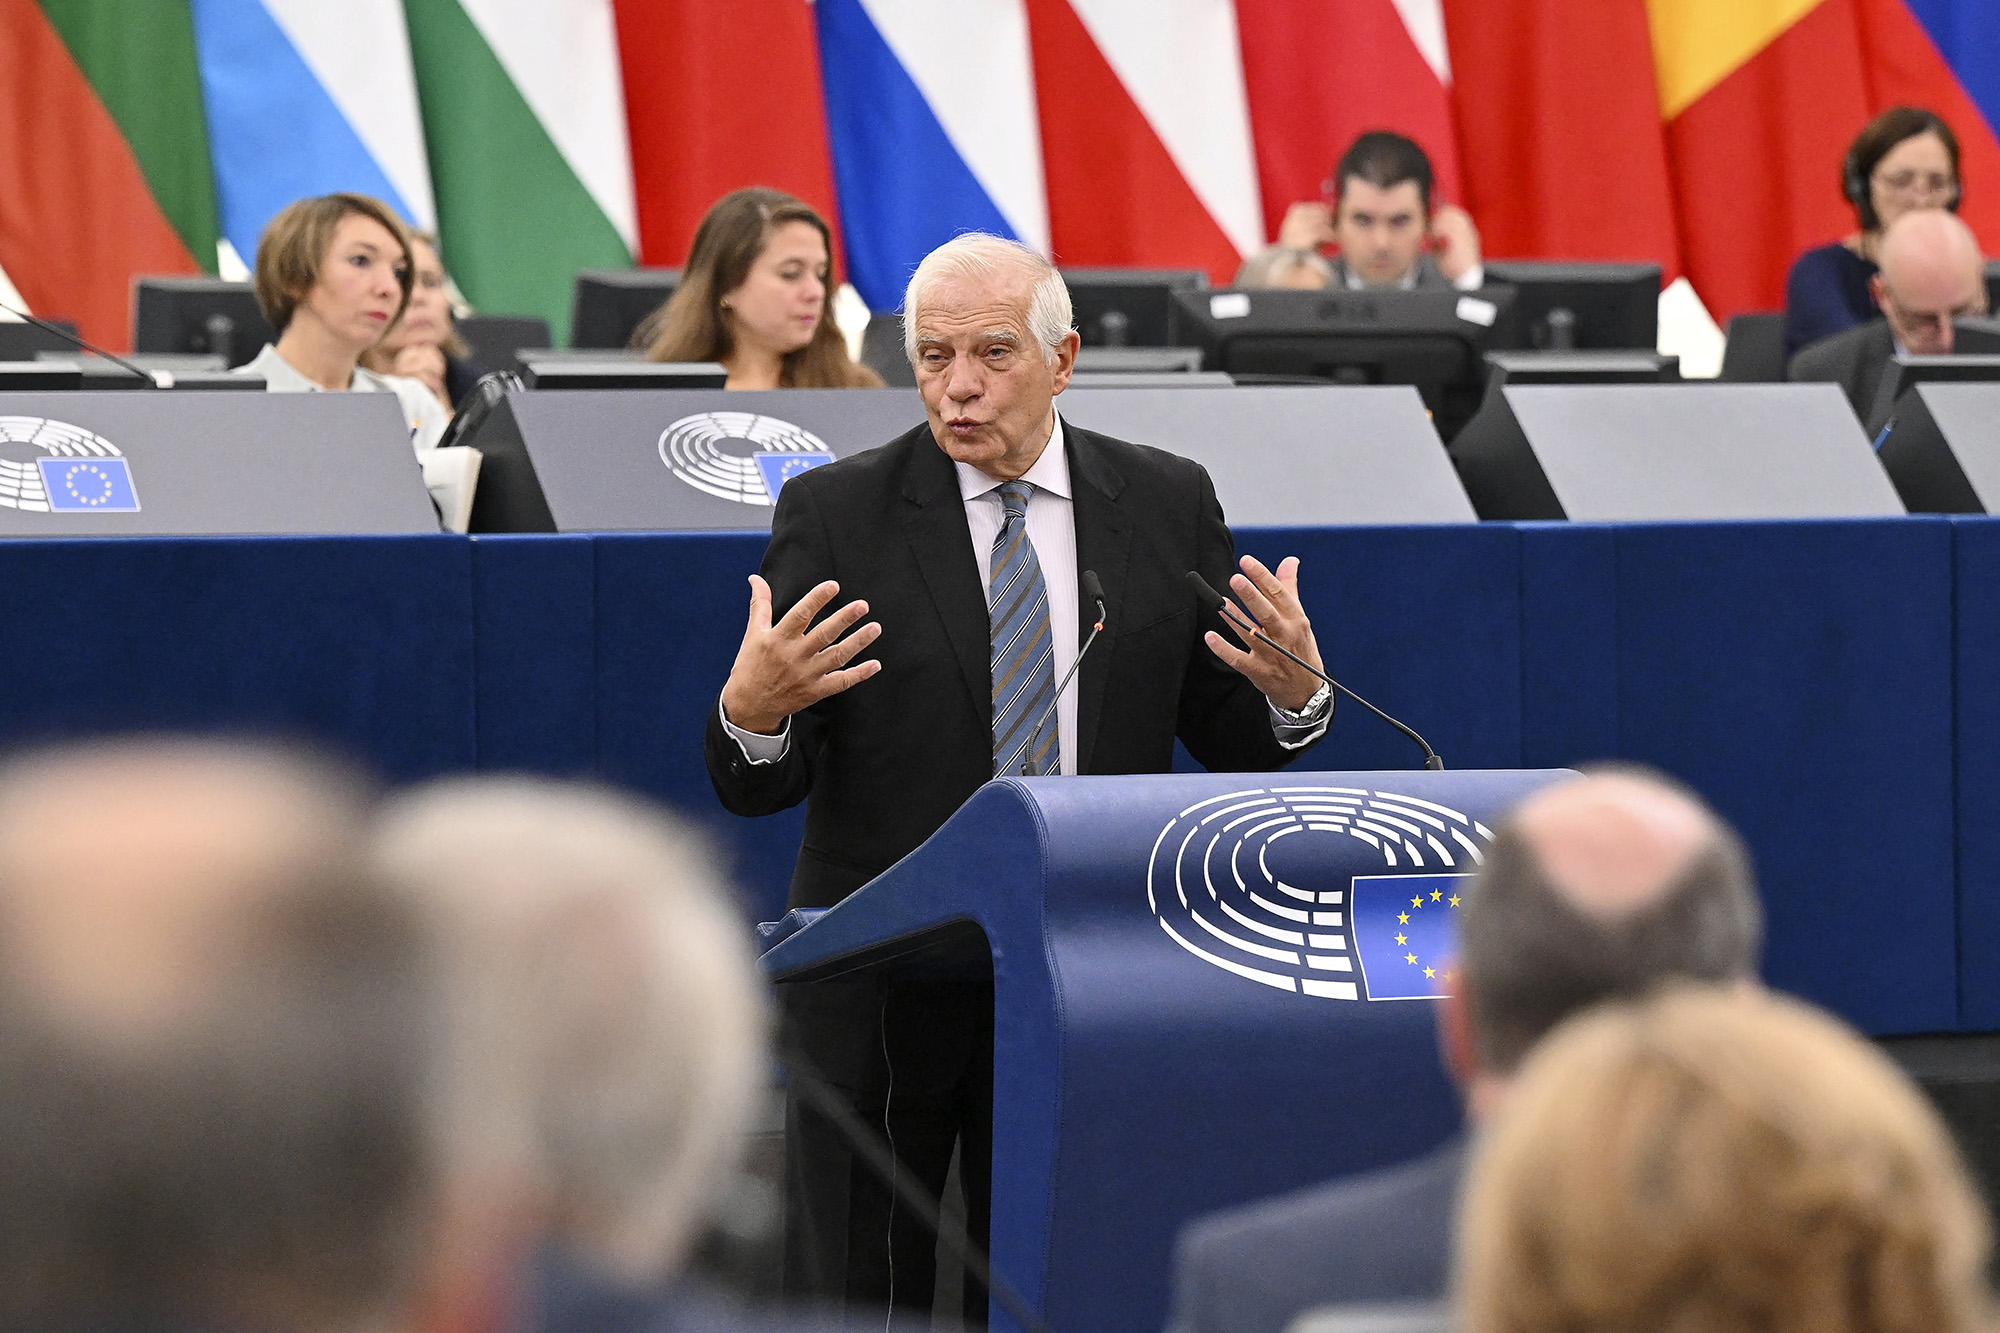 European Union foreign policy chief Josep Borrell delivers a speech during a debate on the Russian invasion of Ukraine, during a plenary session at the European Parliament in Strasbourg, eastern France, on October 5.